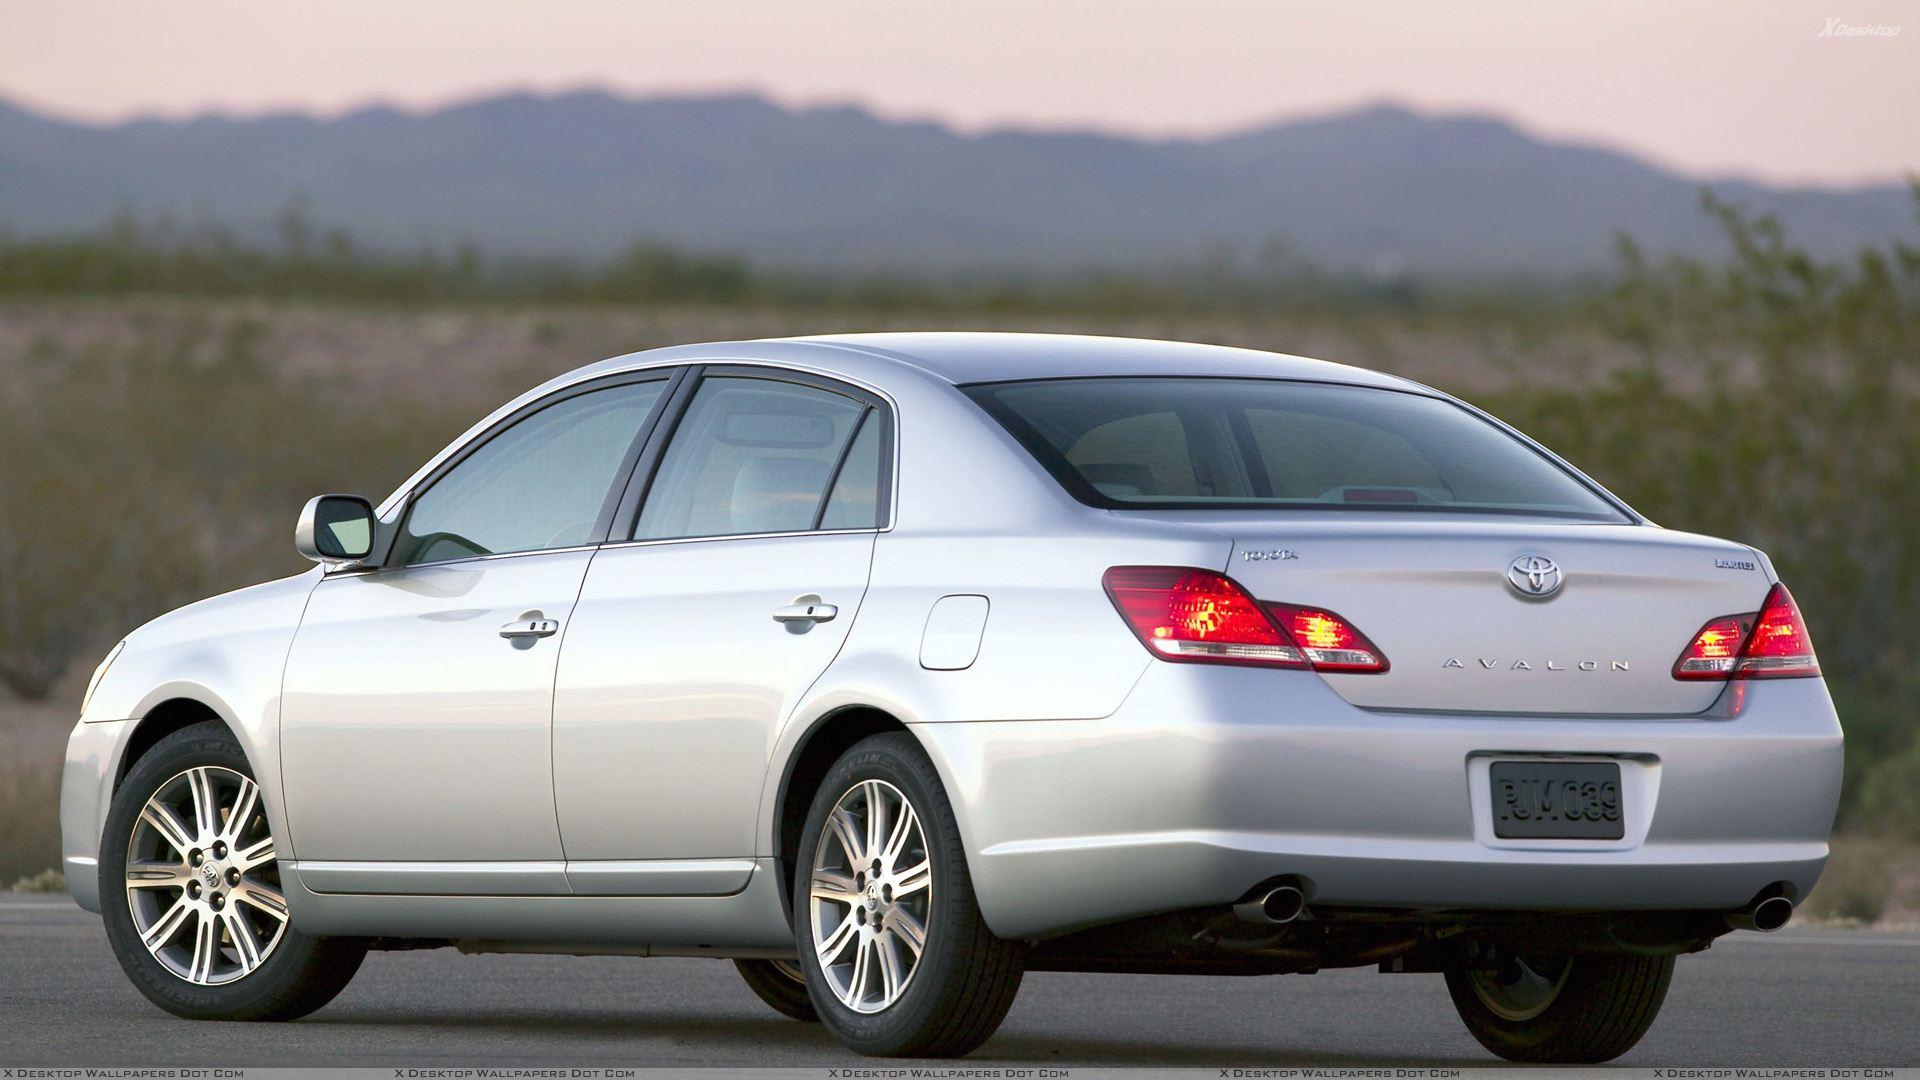 Toyota Avalon Wallpaper, Photo & Image in HD